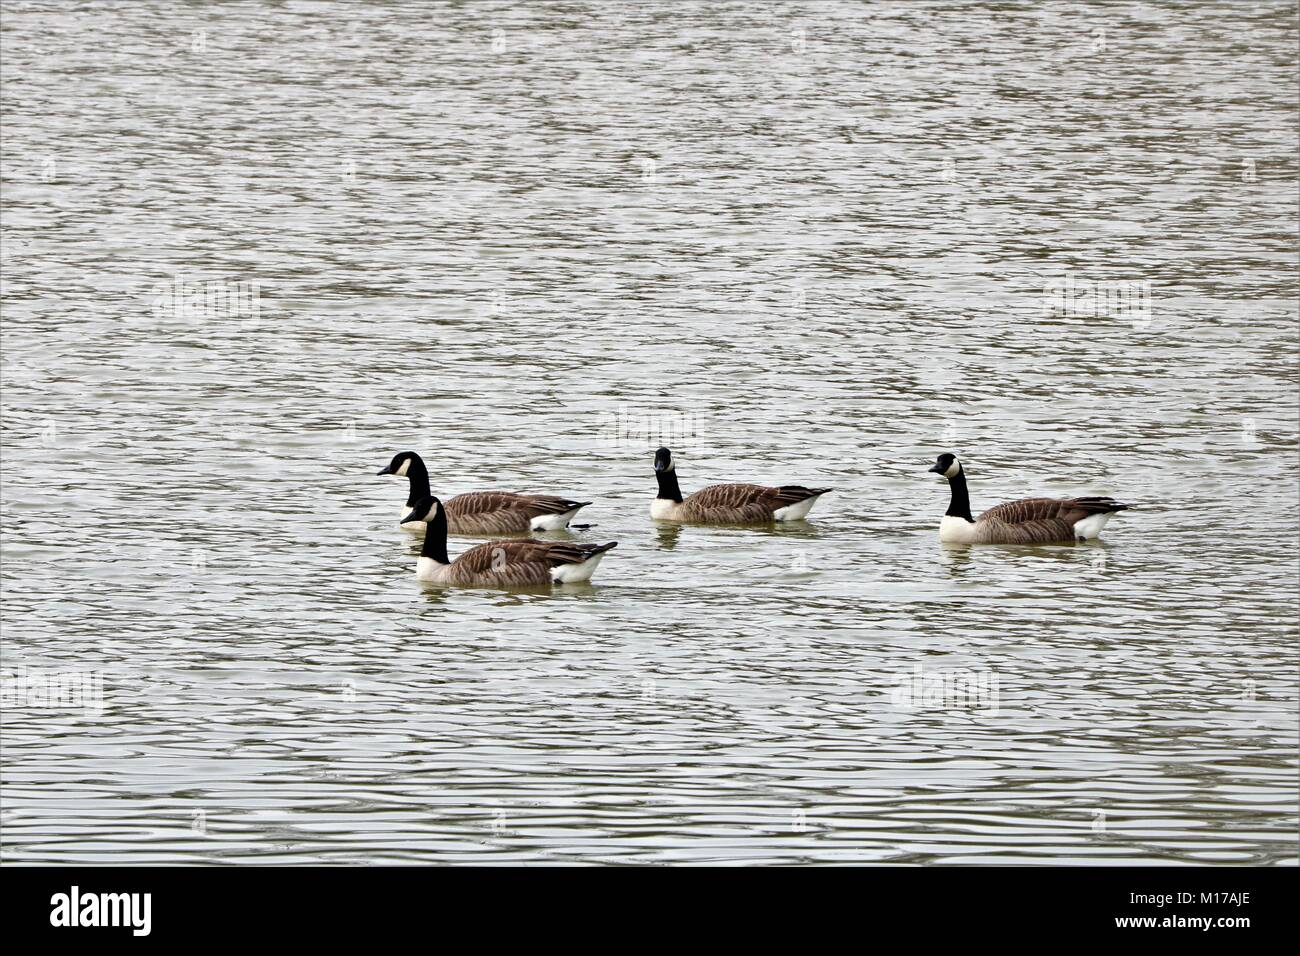 Gaggle of geese on water Stock Photo